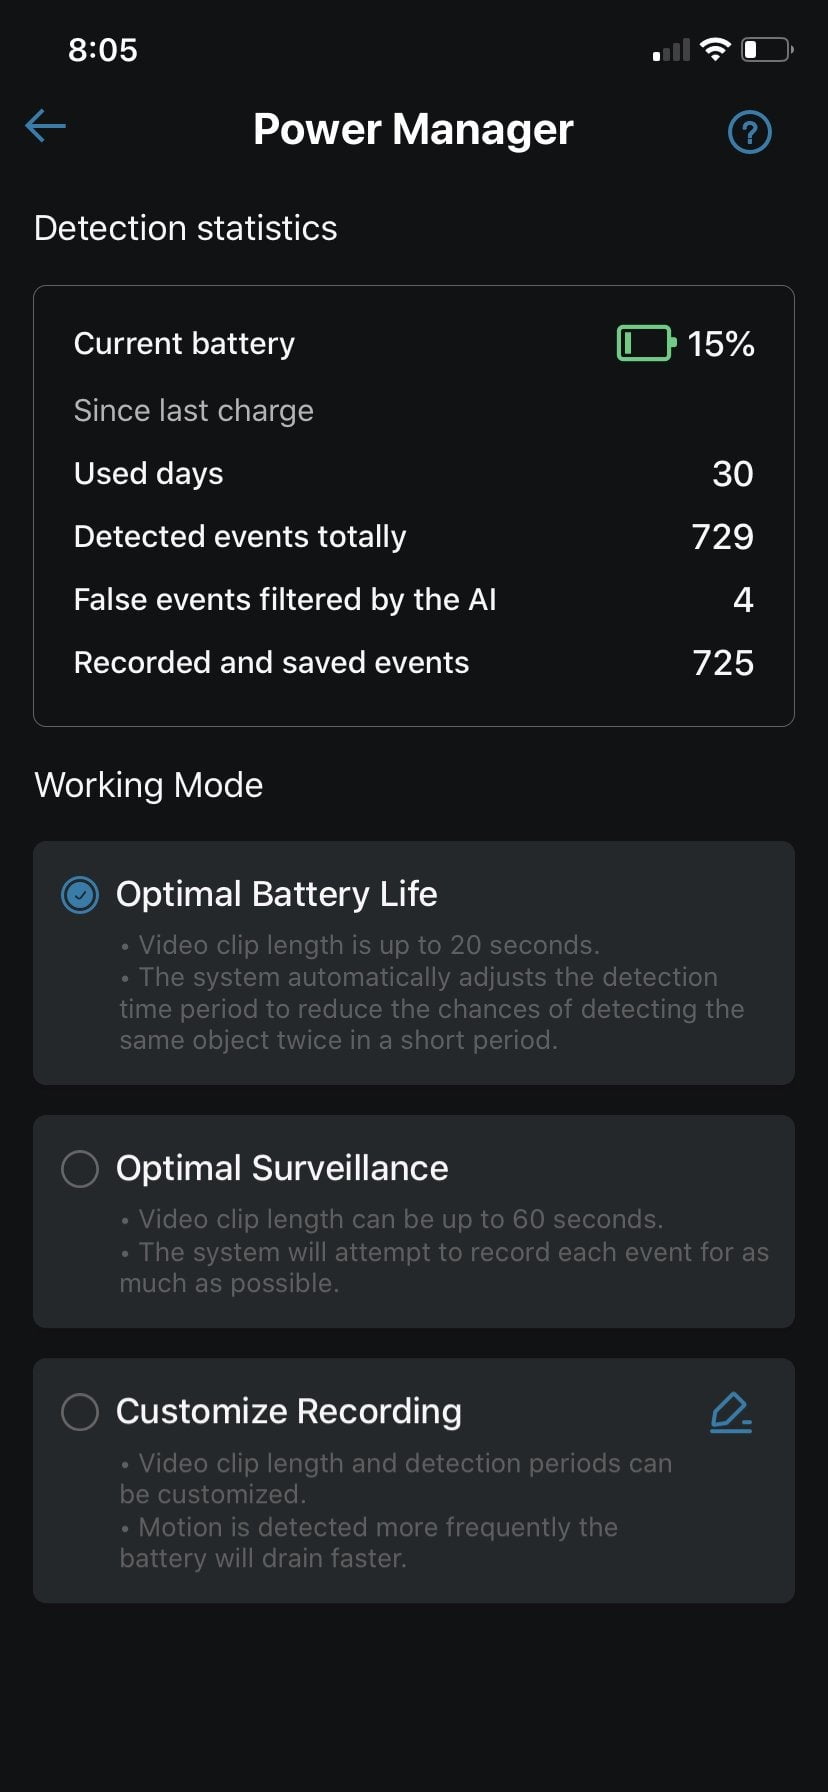 HomeKit Secure Video kills my battery. They had to charge